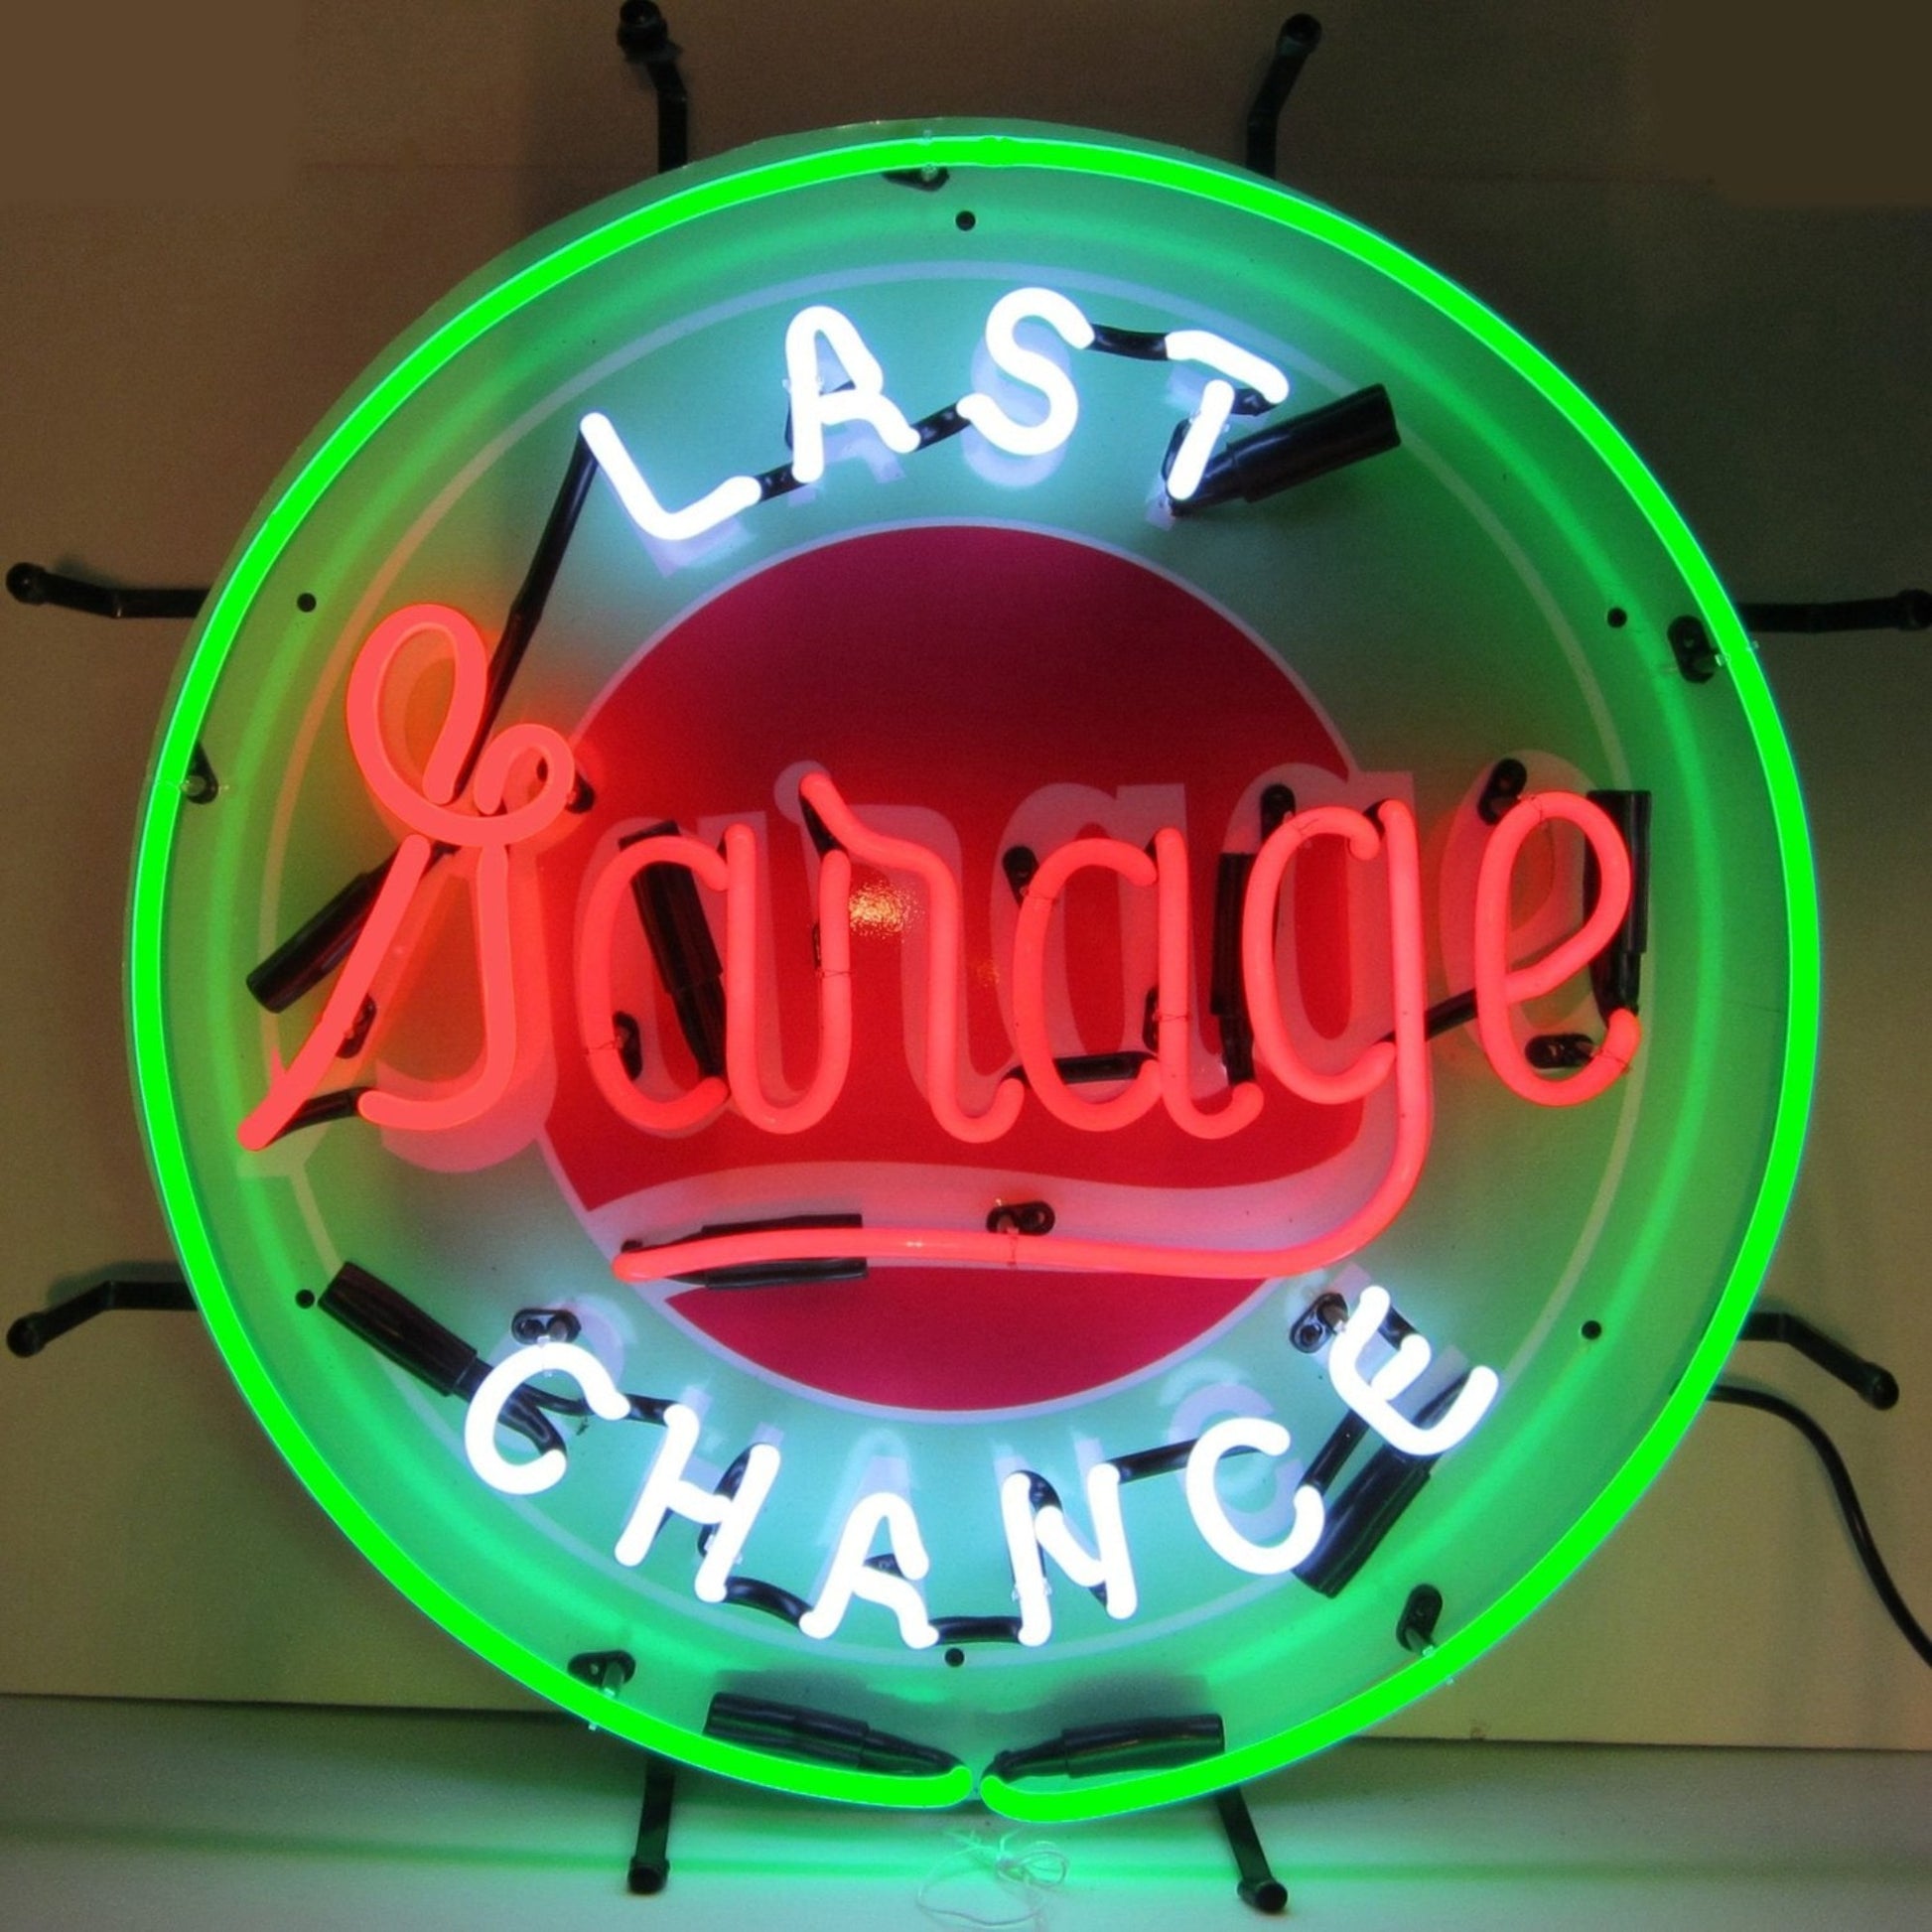 "Last Chance Garage" Neon Sign in radiant red and green, perfect for adding a retro and illuminated touch to any garage or man cave space.